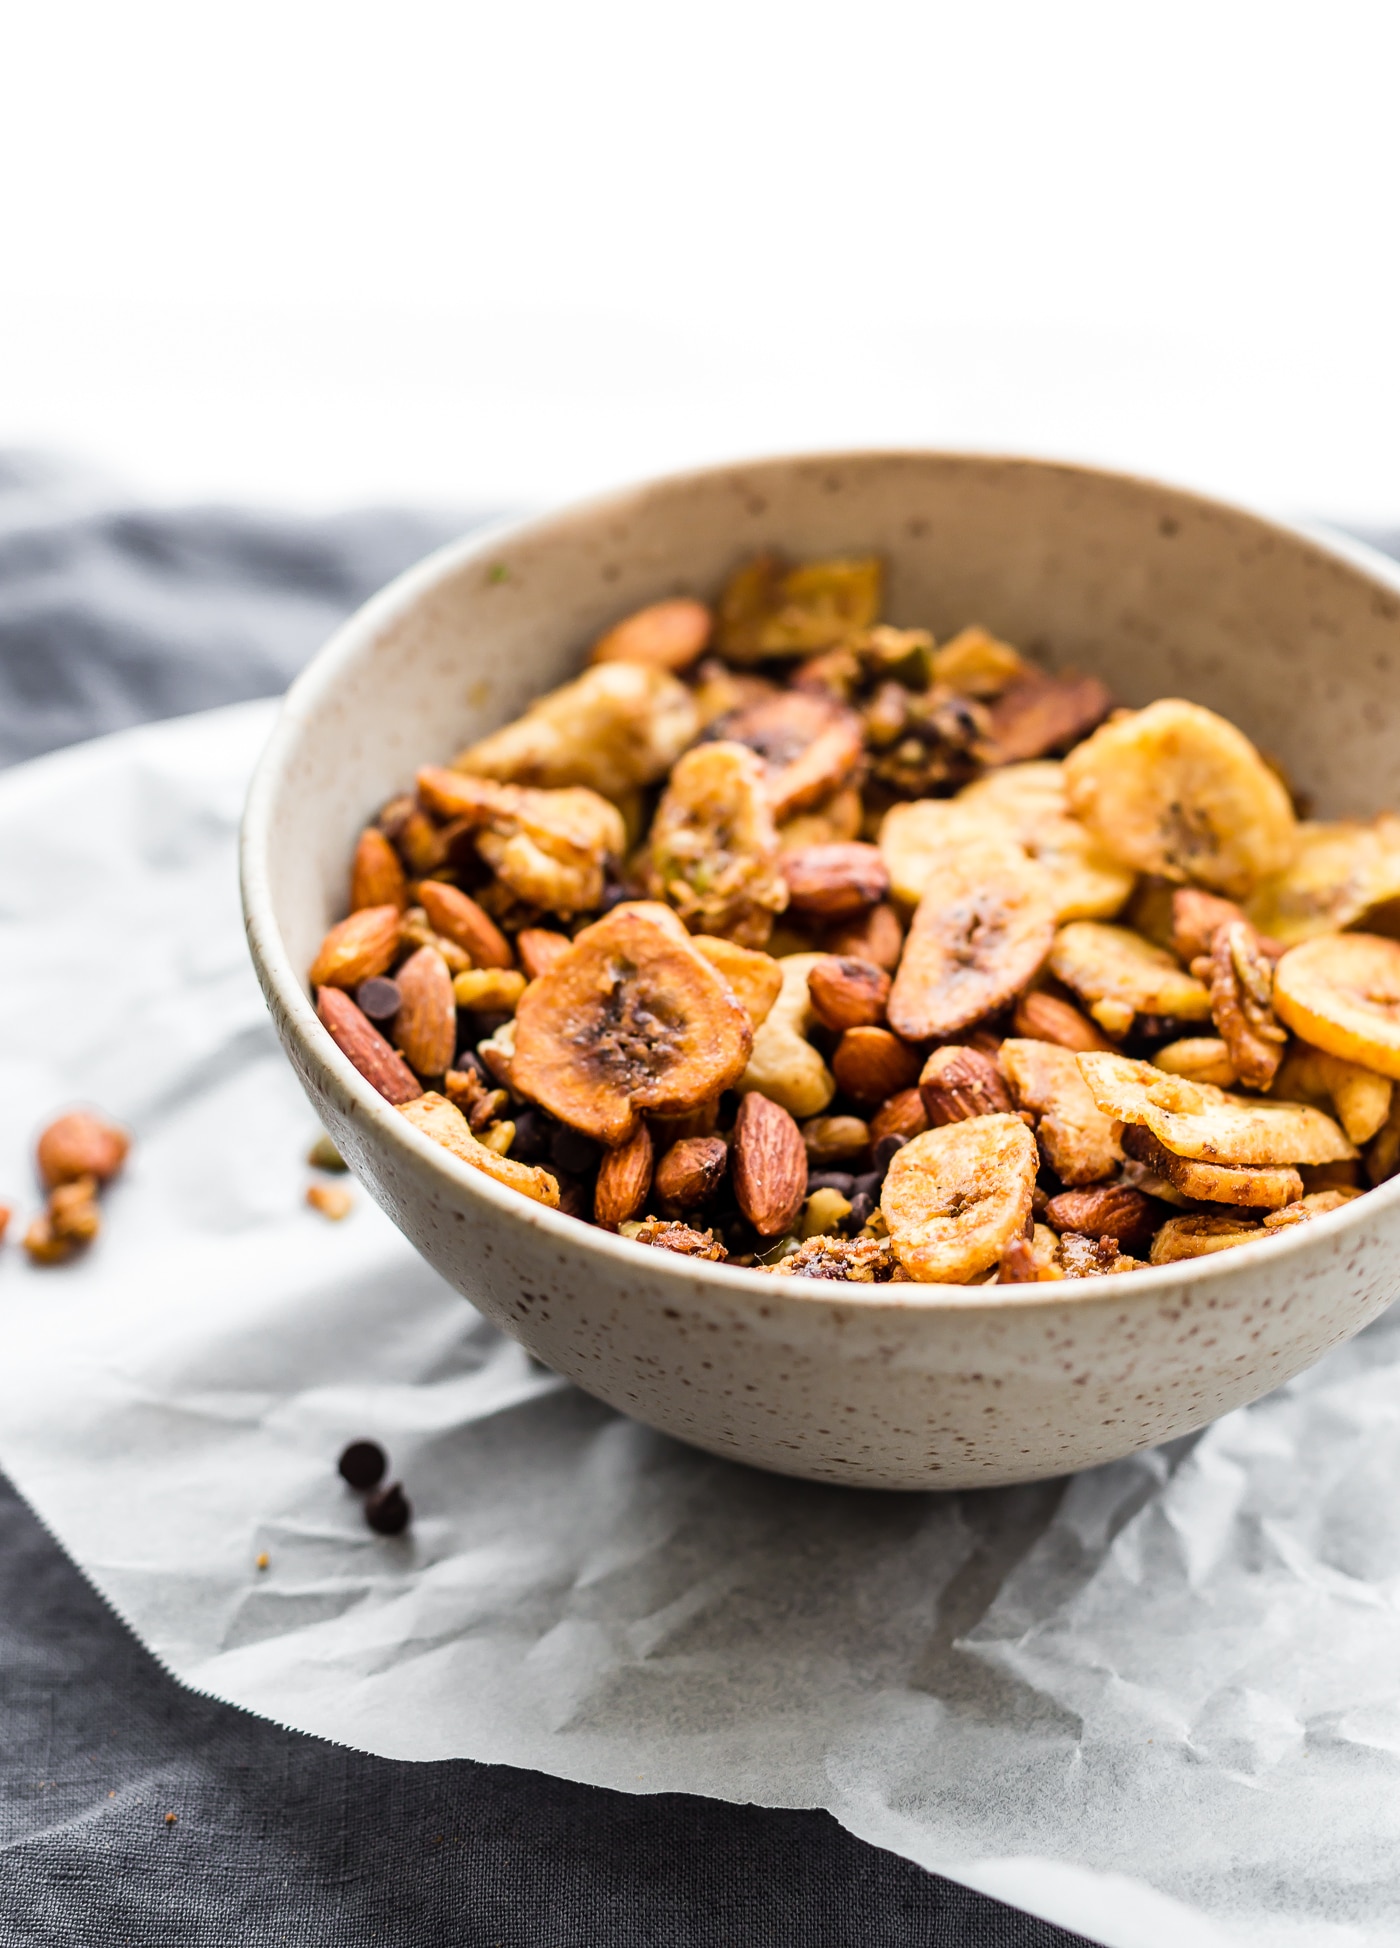 healthy snack mix with nuts, banana chips and dairy-free chocolate chips